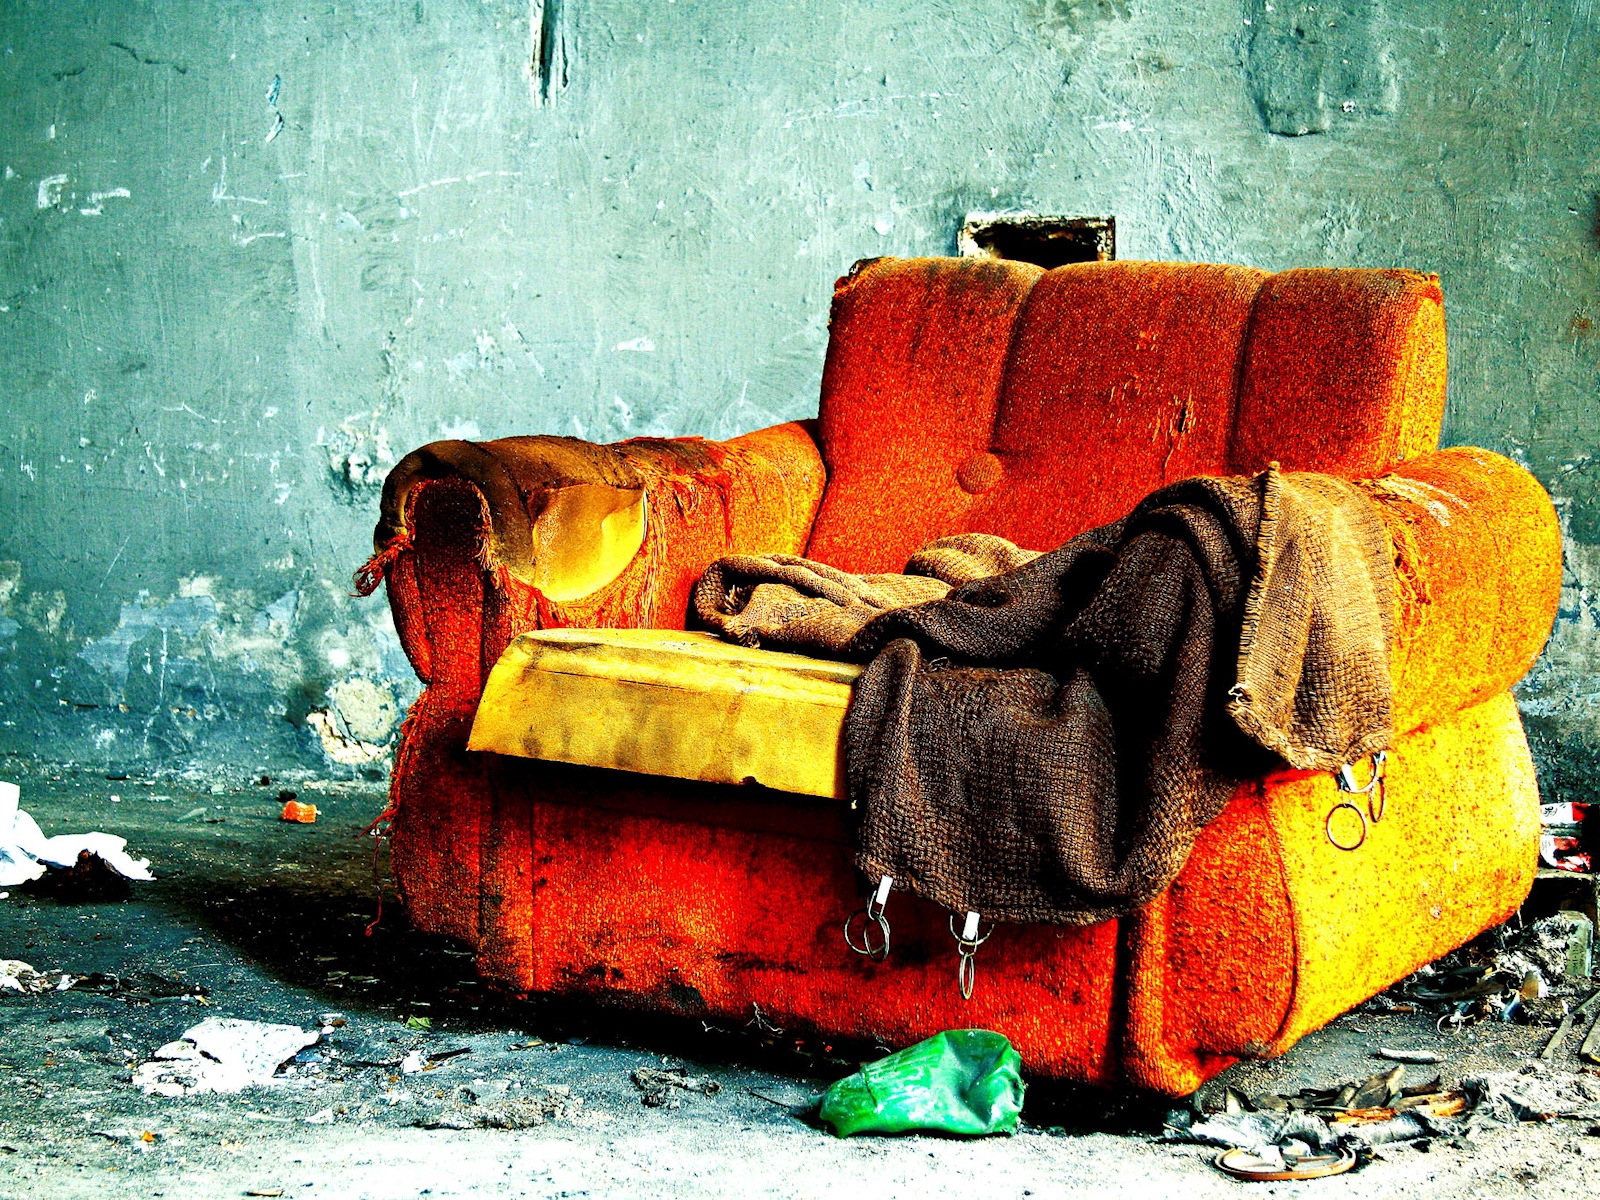 colourful, miscellanea, miscellaneous, old, colorful, armchair, ancient, ragged 2160p